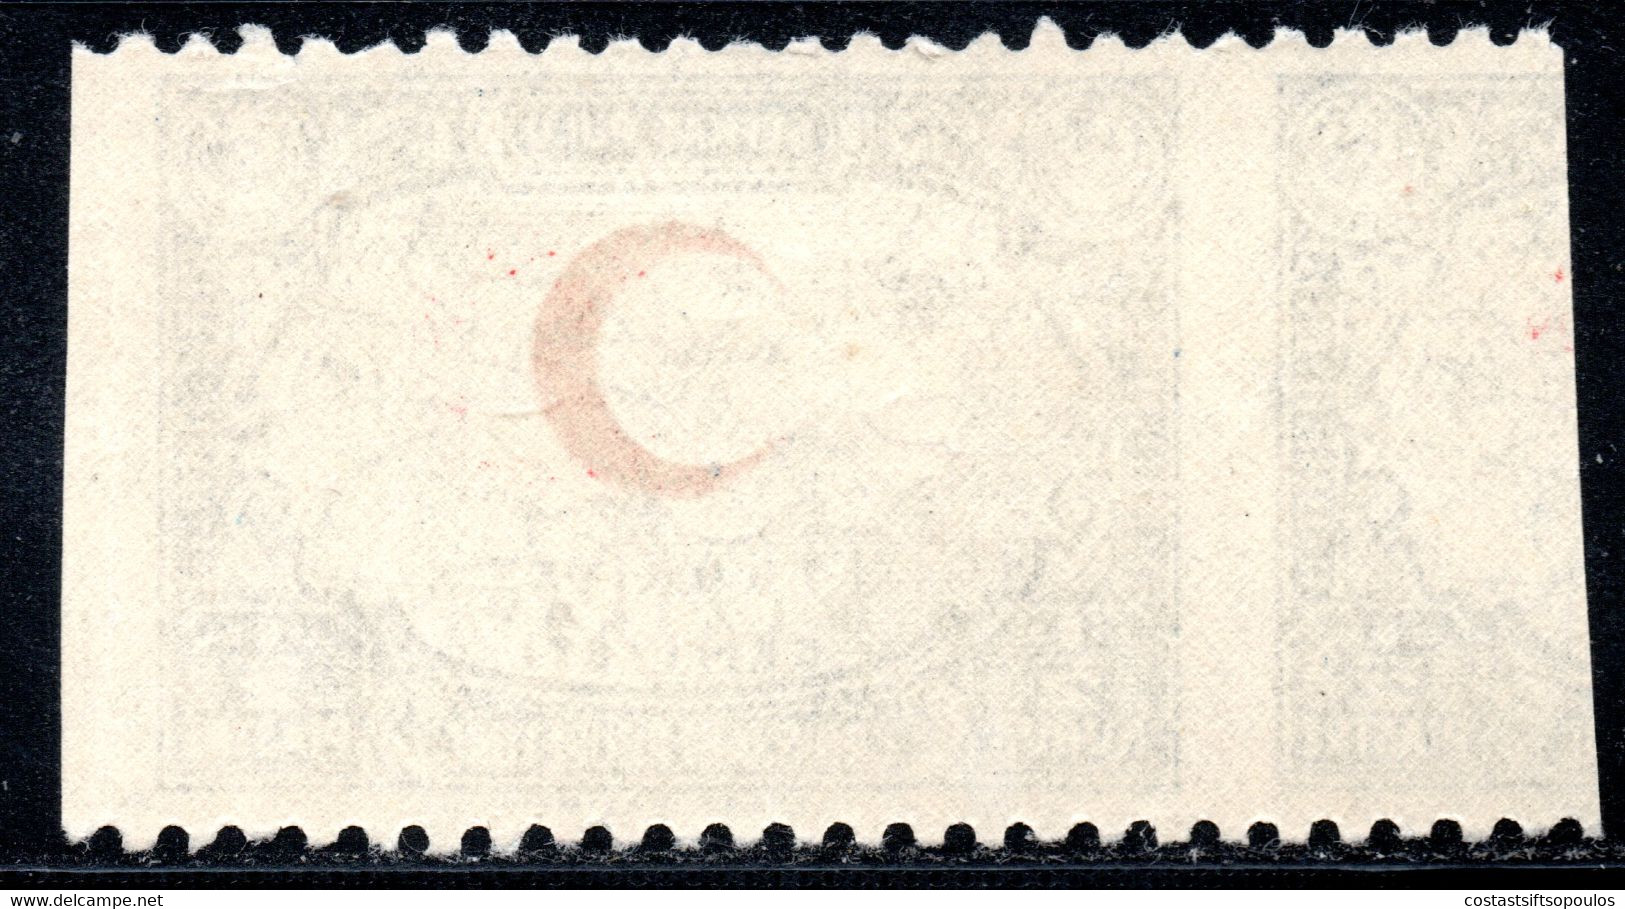 1010.TURKEY,1935 RED CRESCENT,MAP MICH.27A,SC.RA 23 IMPERF.VERTICALLY,MNH,UNRECORDED - Nuevos